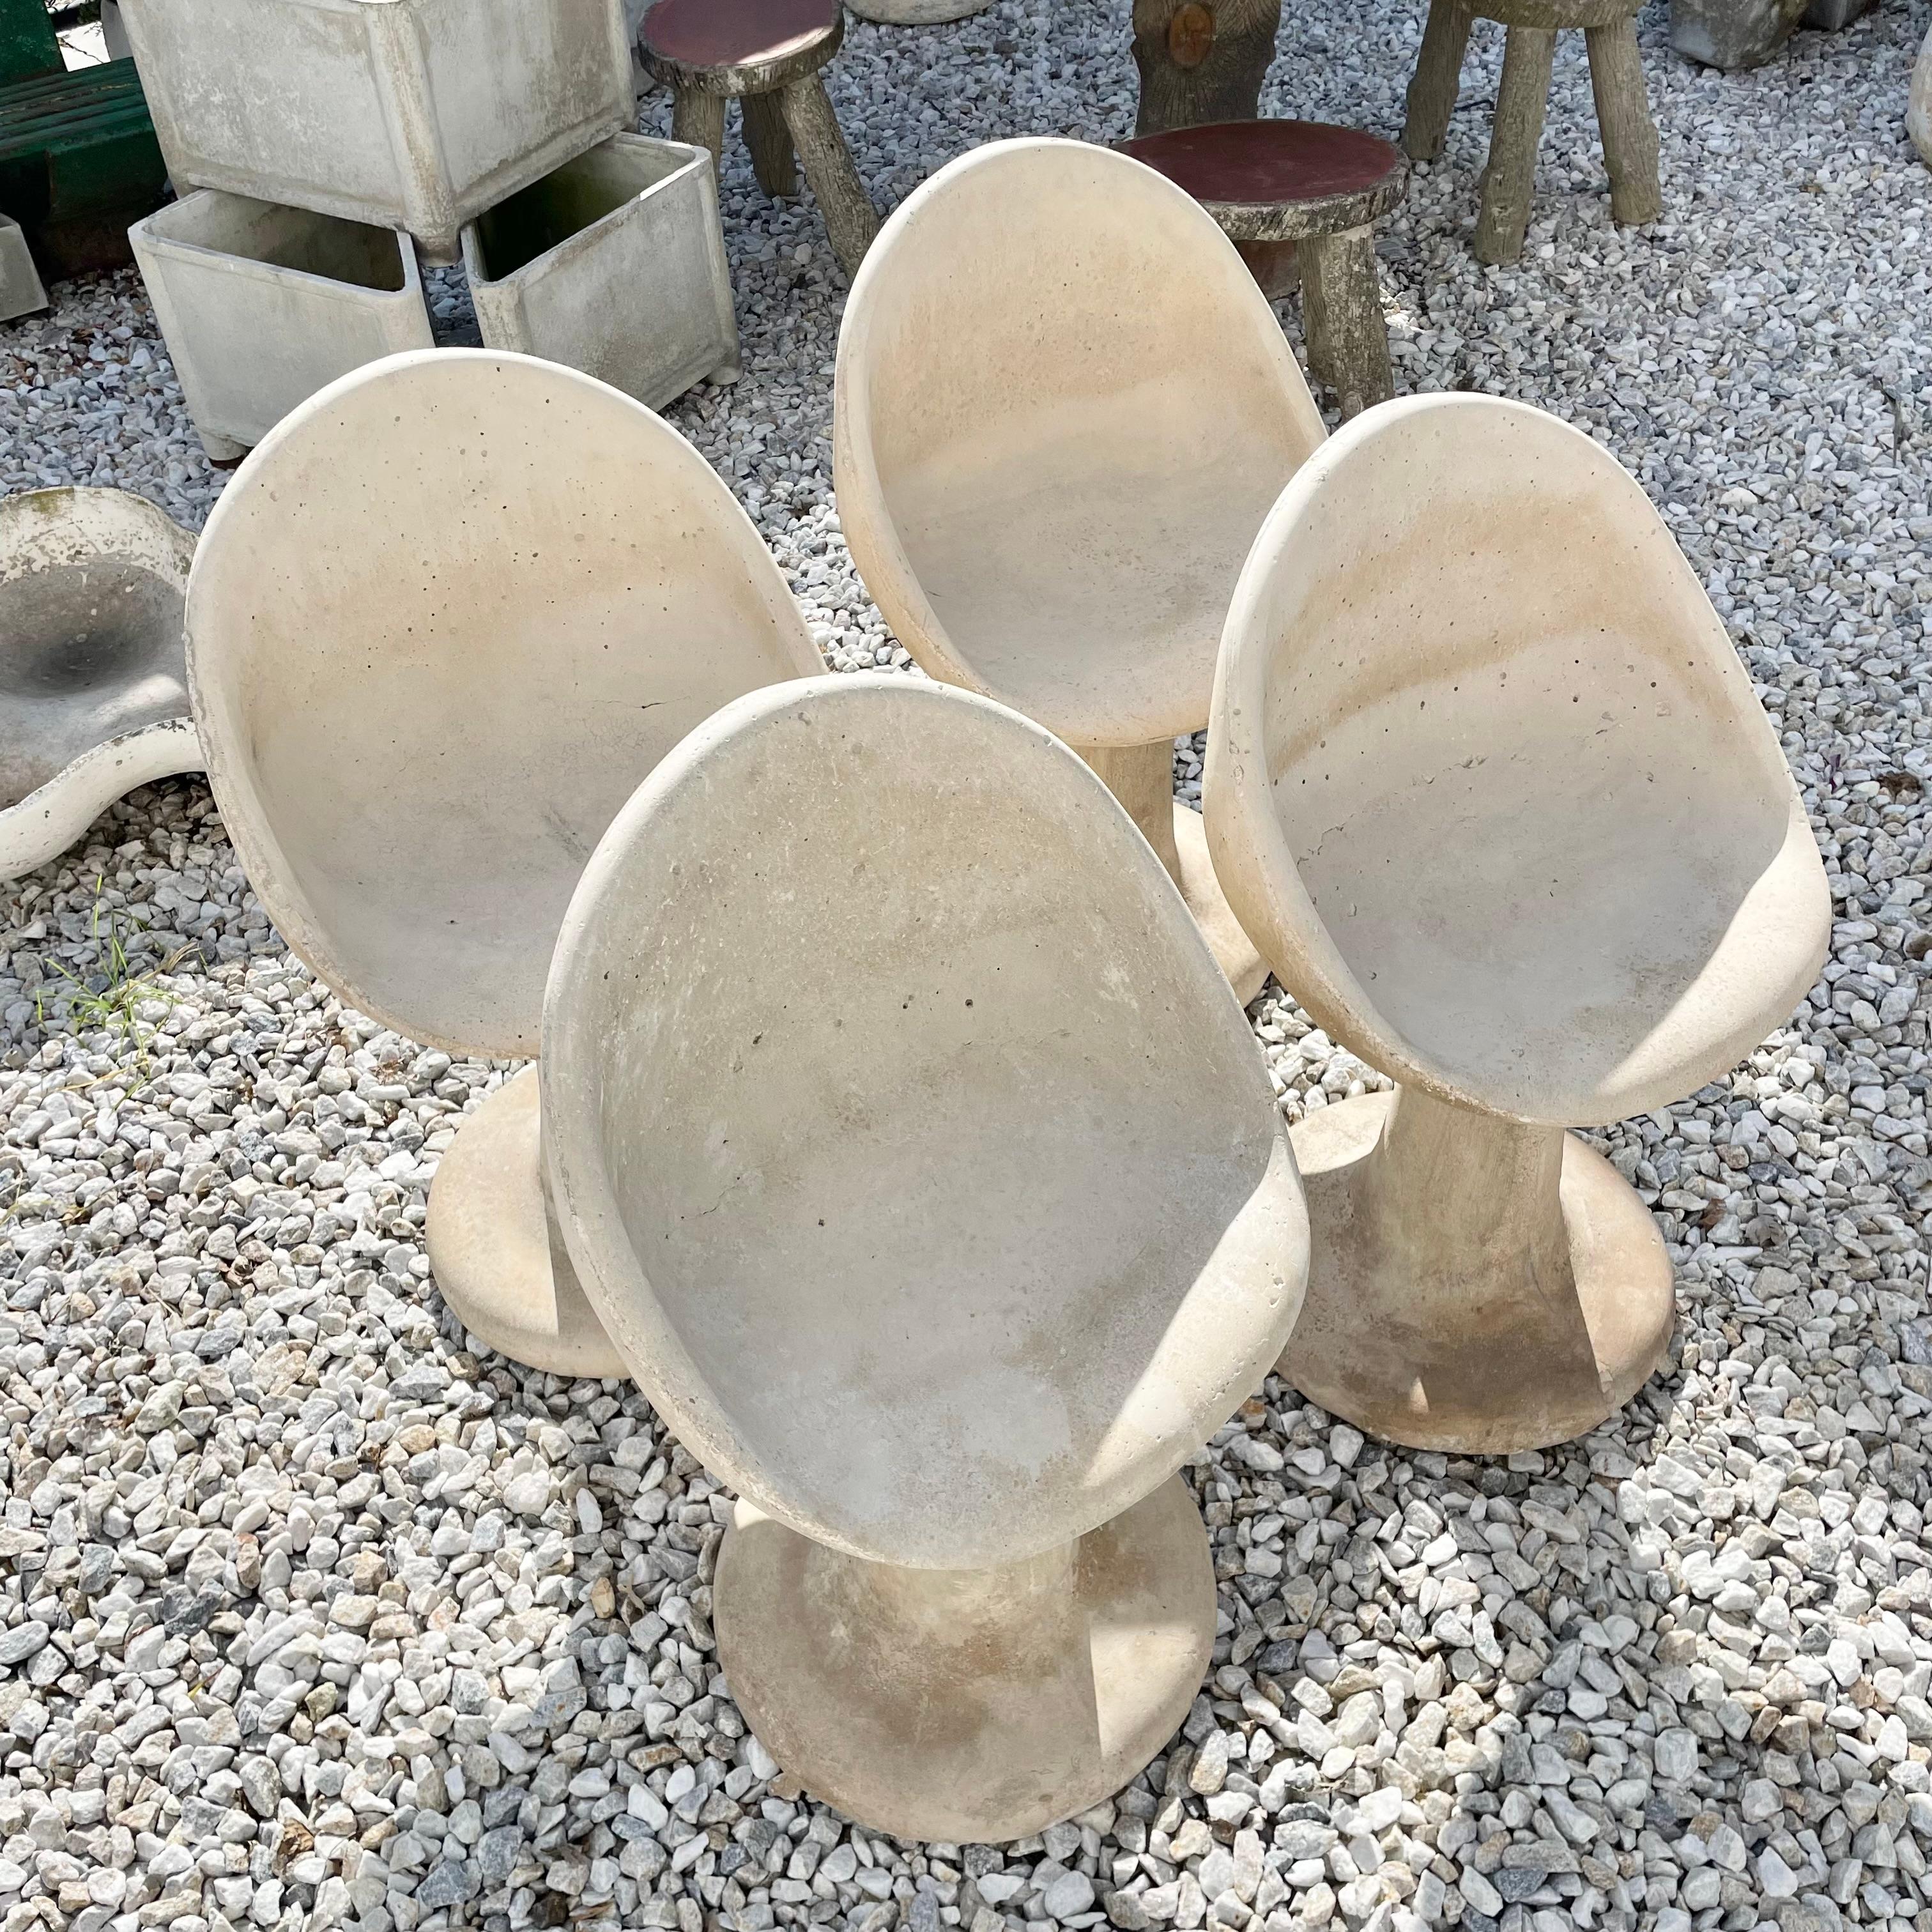 Brutalist Willy Guhl Style Concrete Tulip Chairs, 1970s USA For Sale